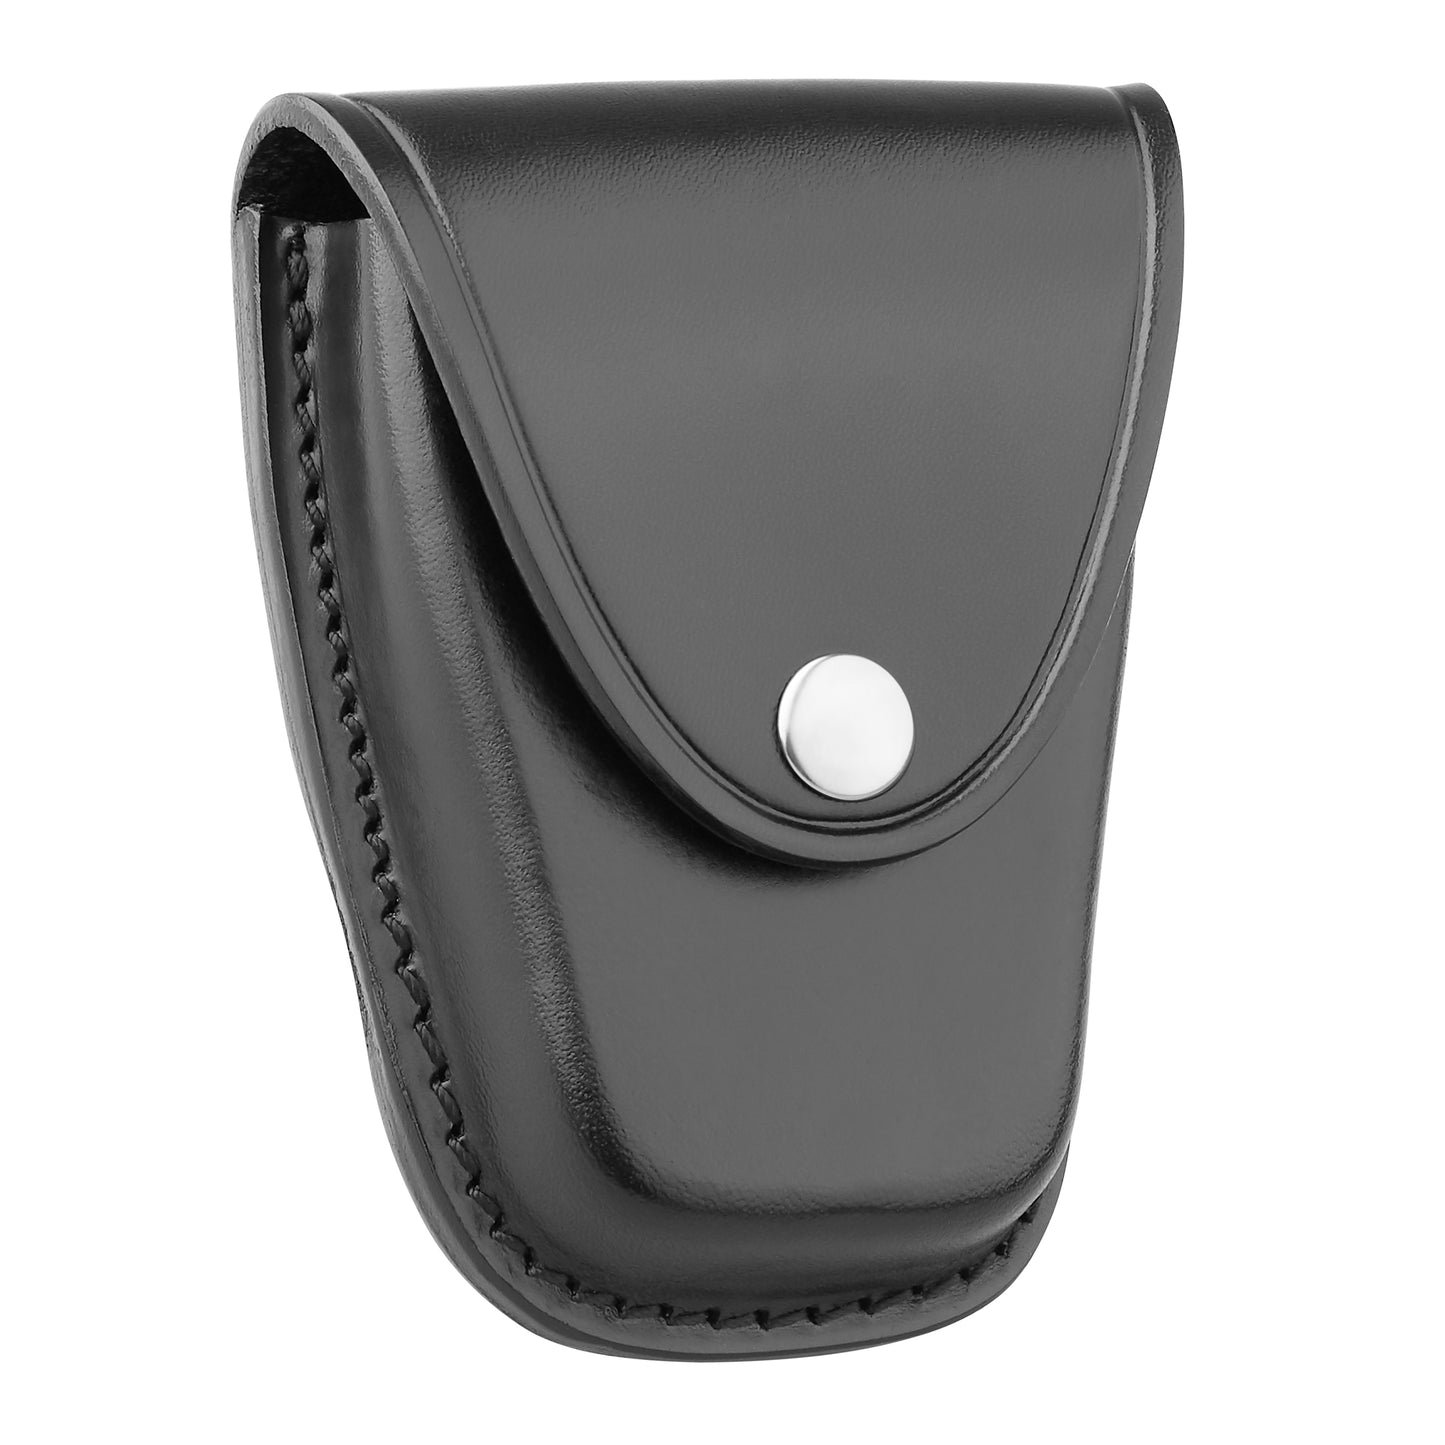 closed classic black leather handcuff case with silver button snap